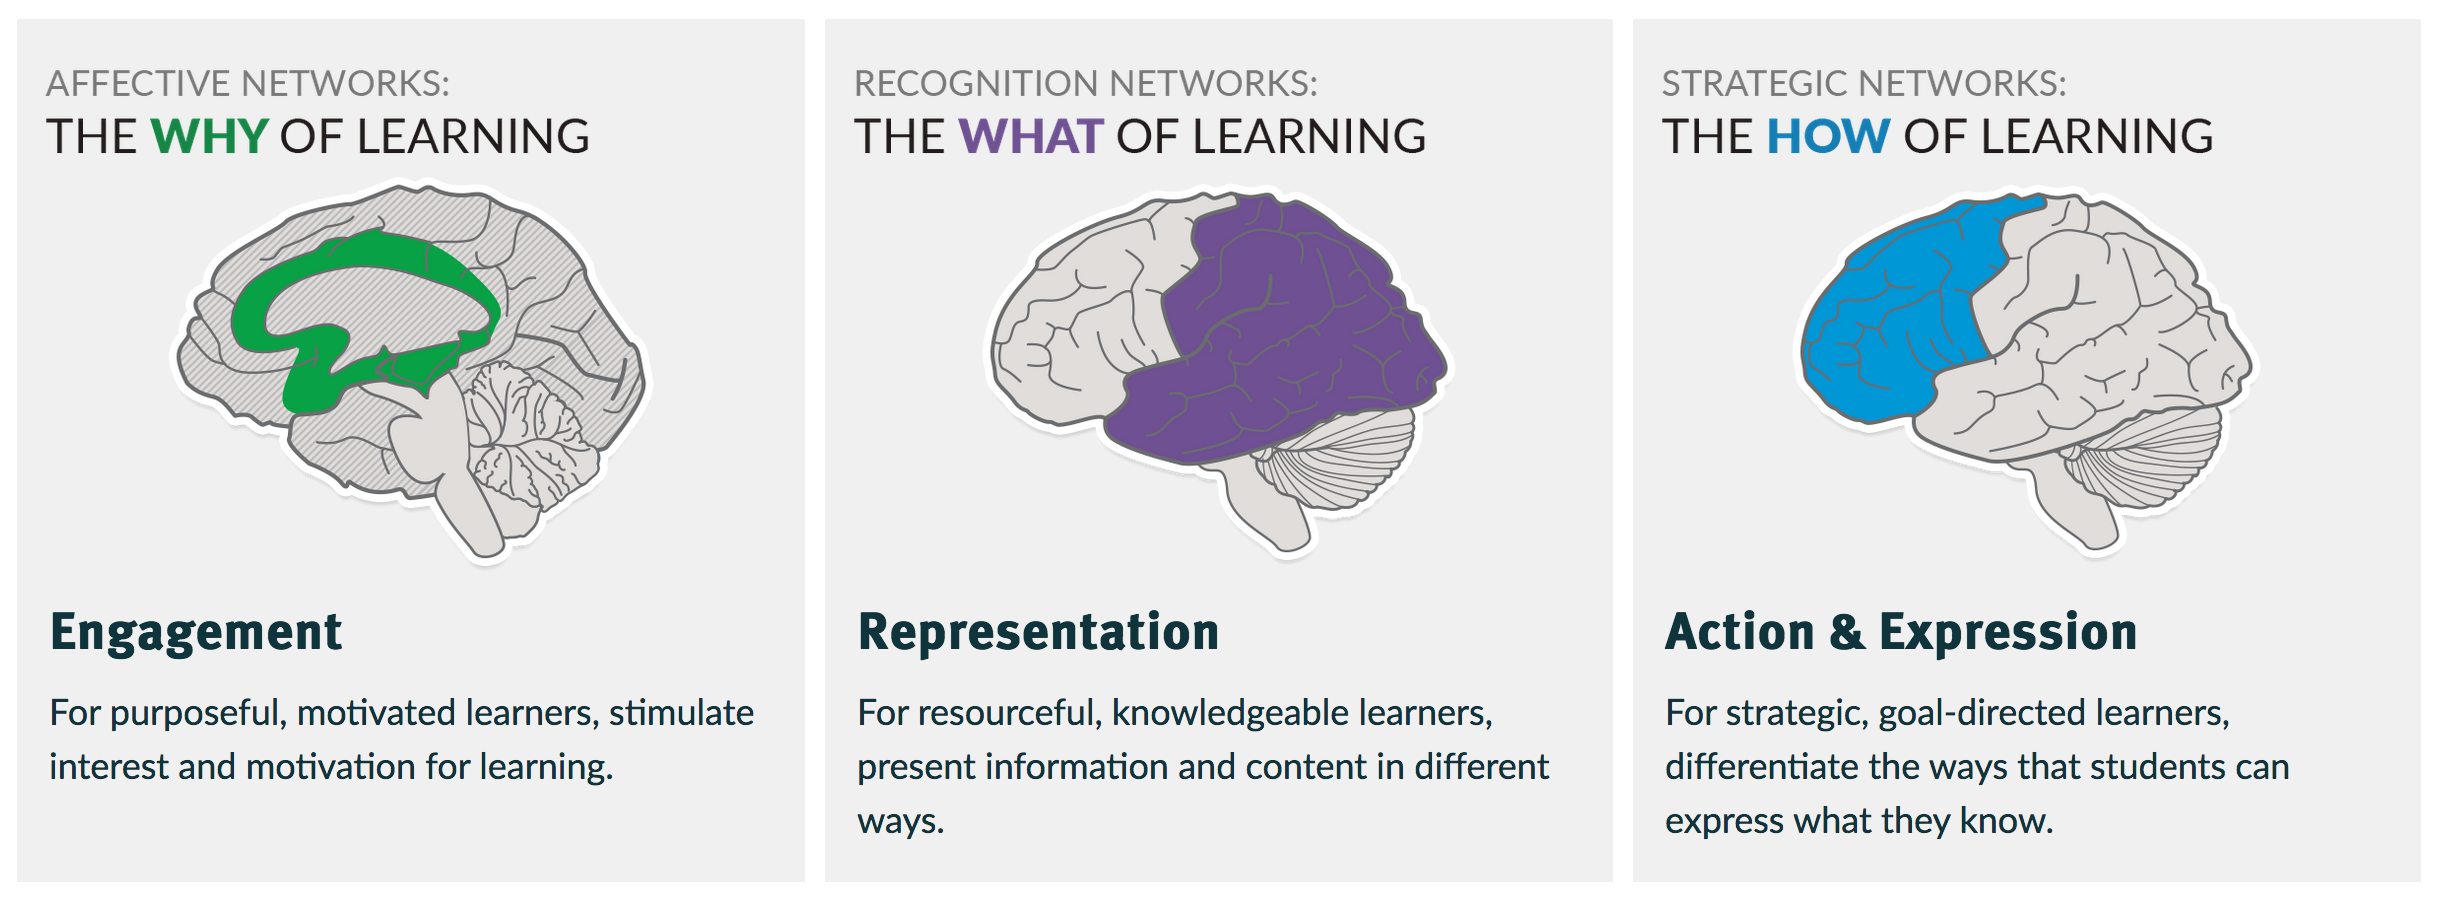 Illustration of the three main pillars of UDL from www.cast.org